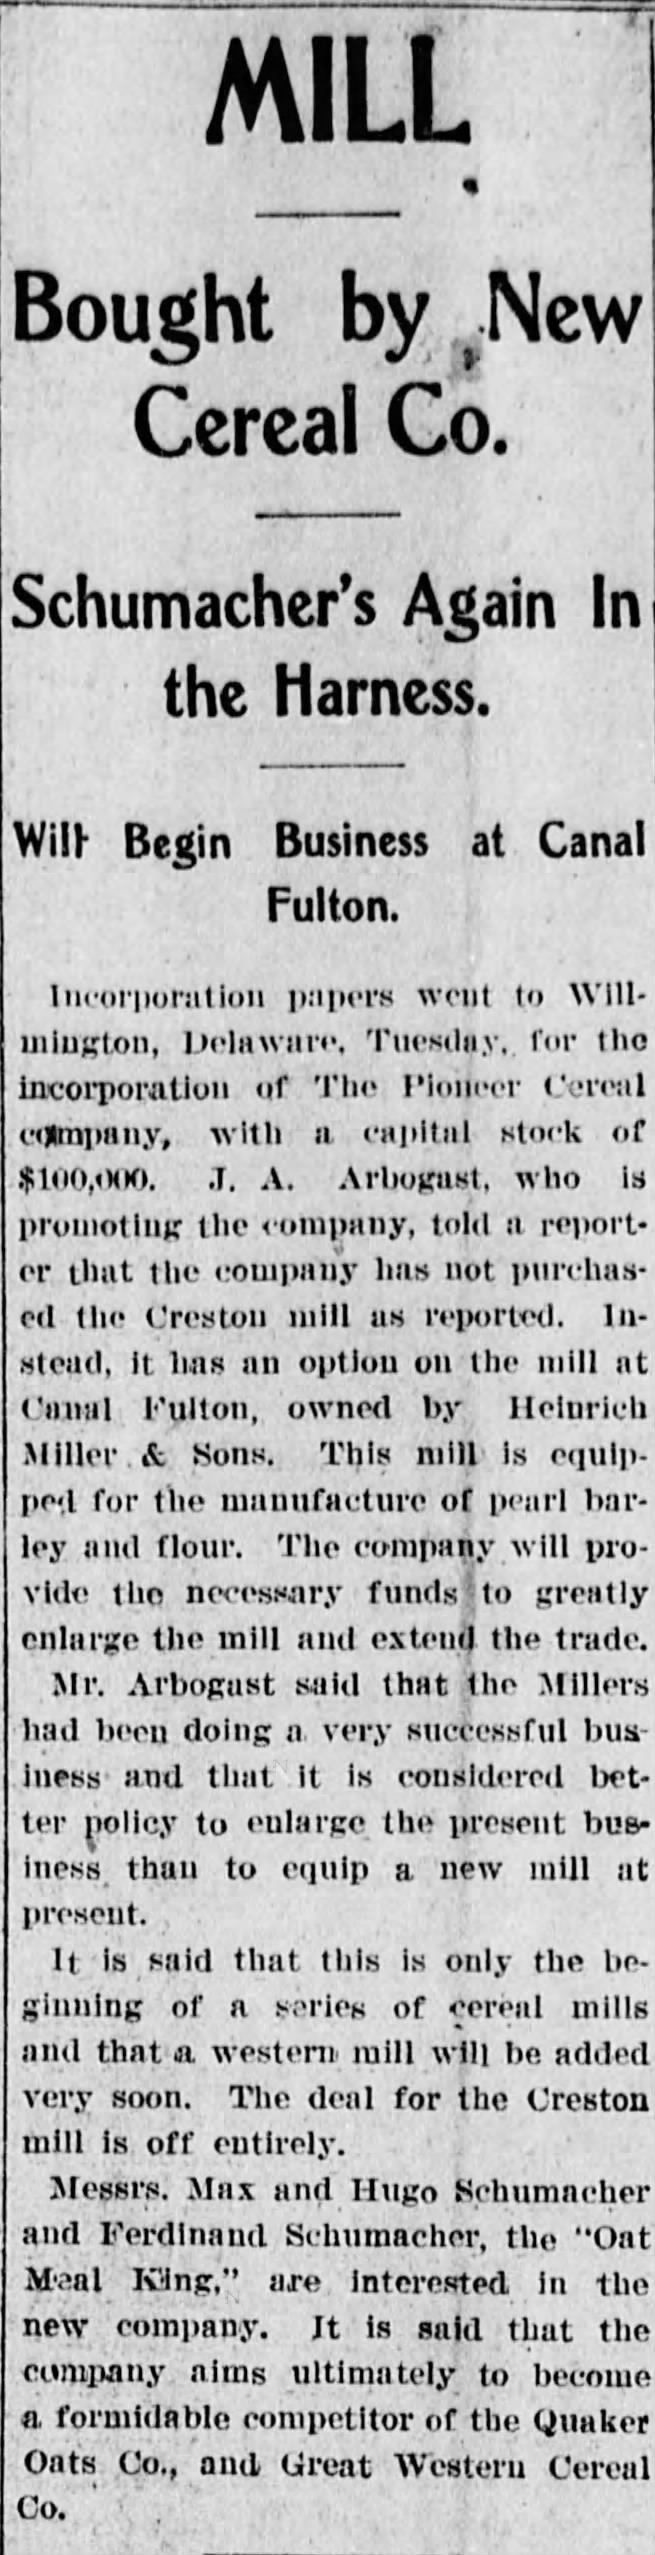 PIONEER Cereal Co. 1902.01.14 Start up by F. Schumacher